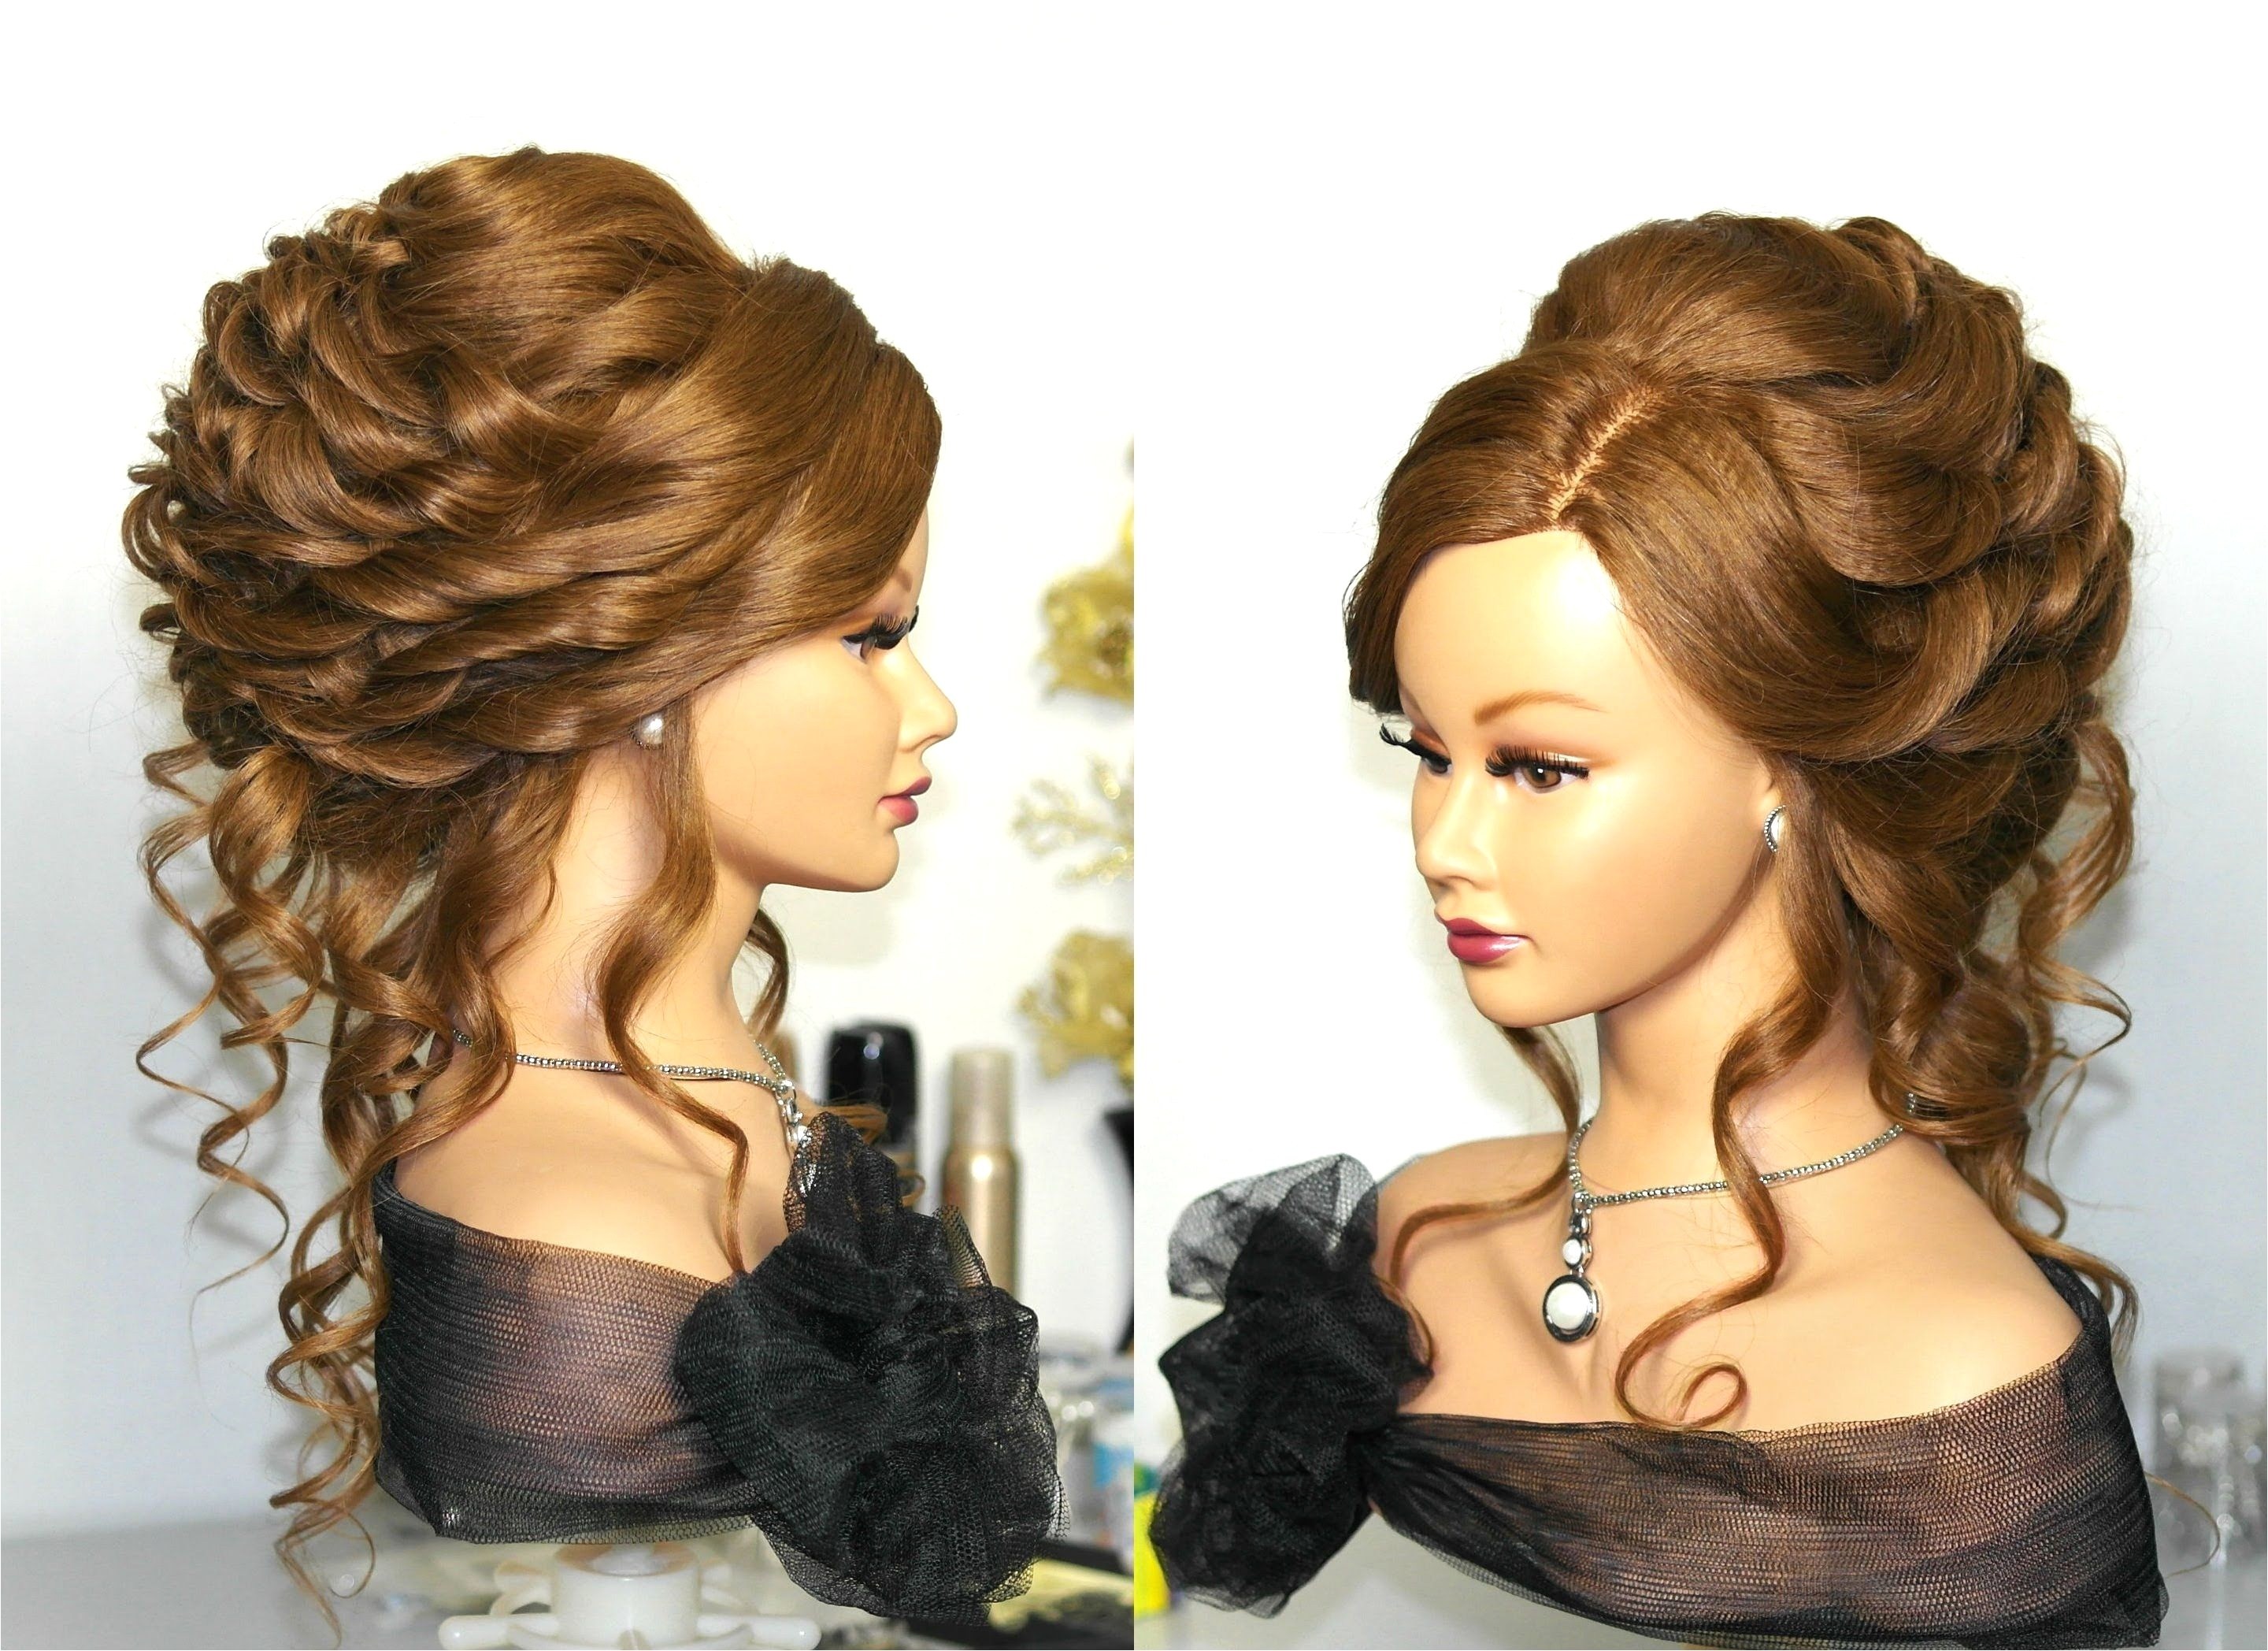 Hairstyles for American Girl Dolls with Curly Hair Elegant Curly Bun Hairstyles Awesome Inspirational Wedding Hairstyles